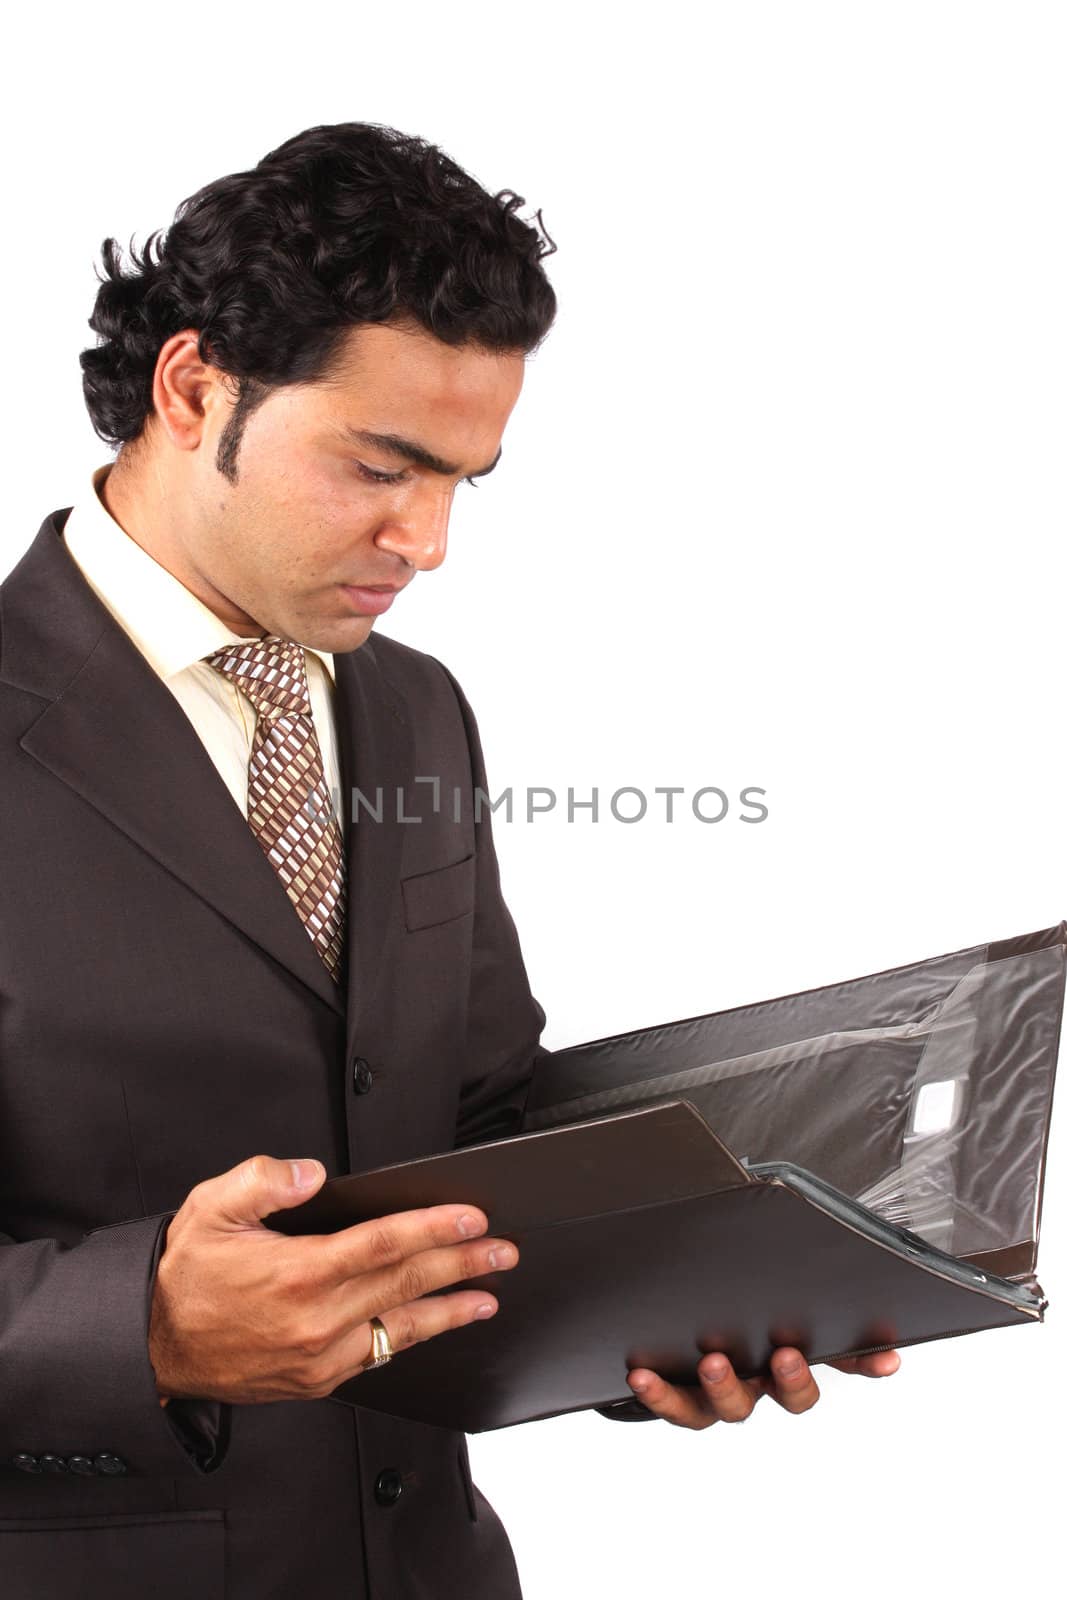 An Indian businessman checking documents in a file, on white studio background.